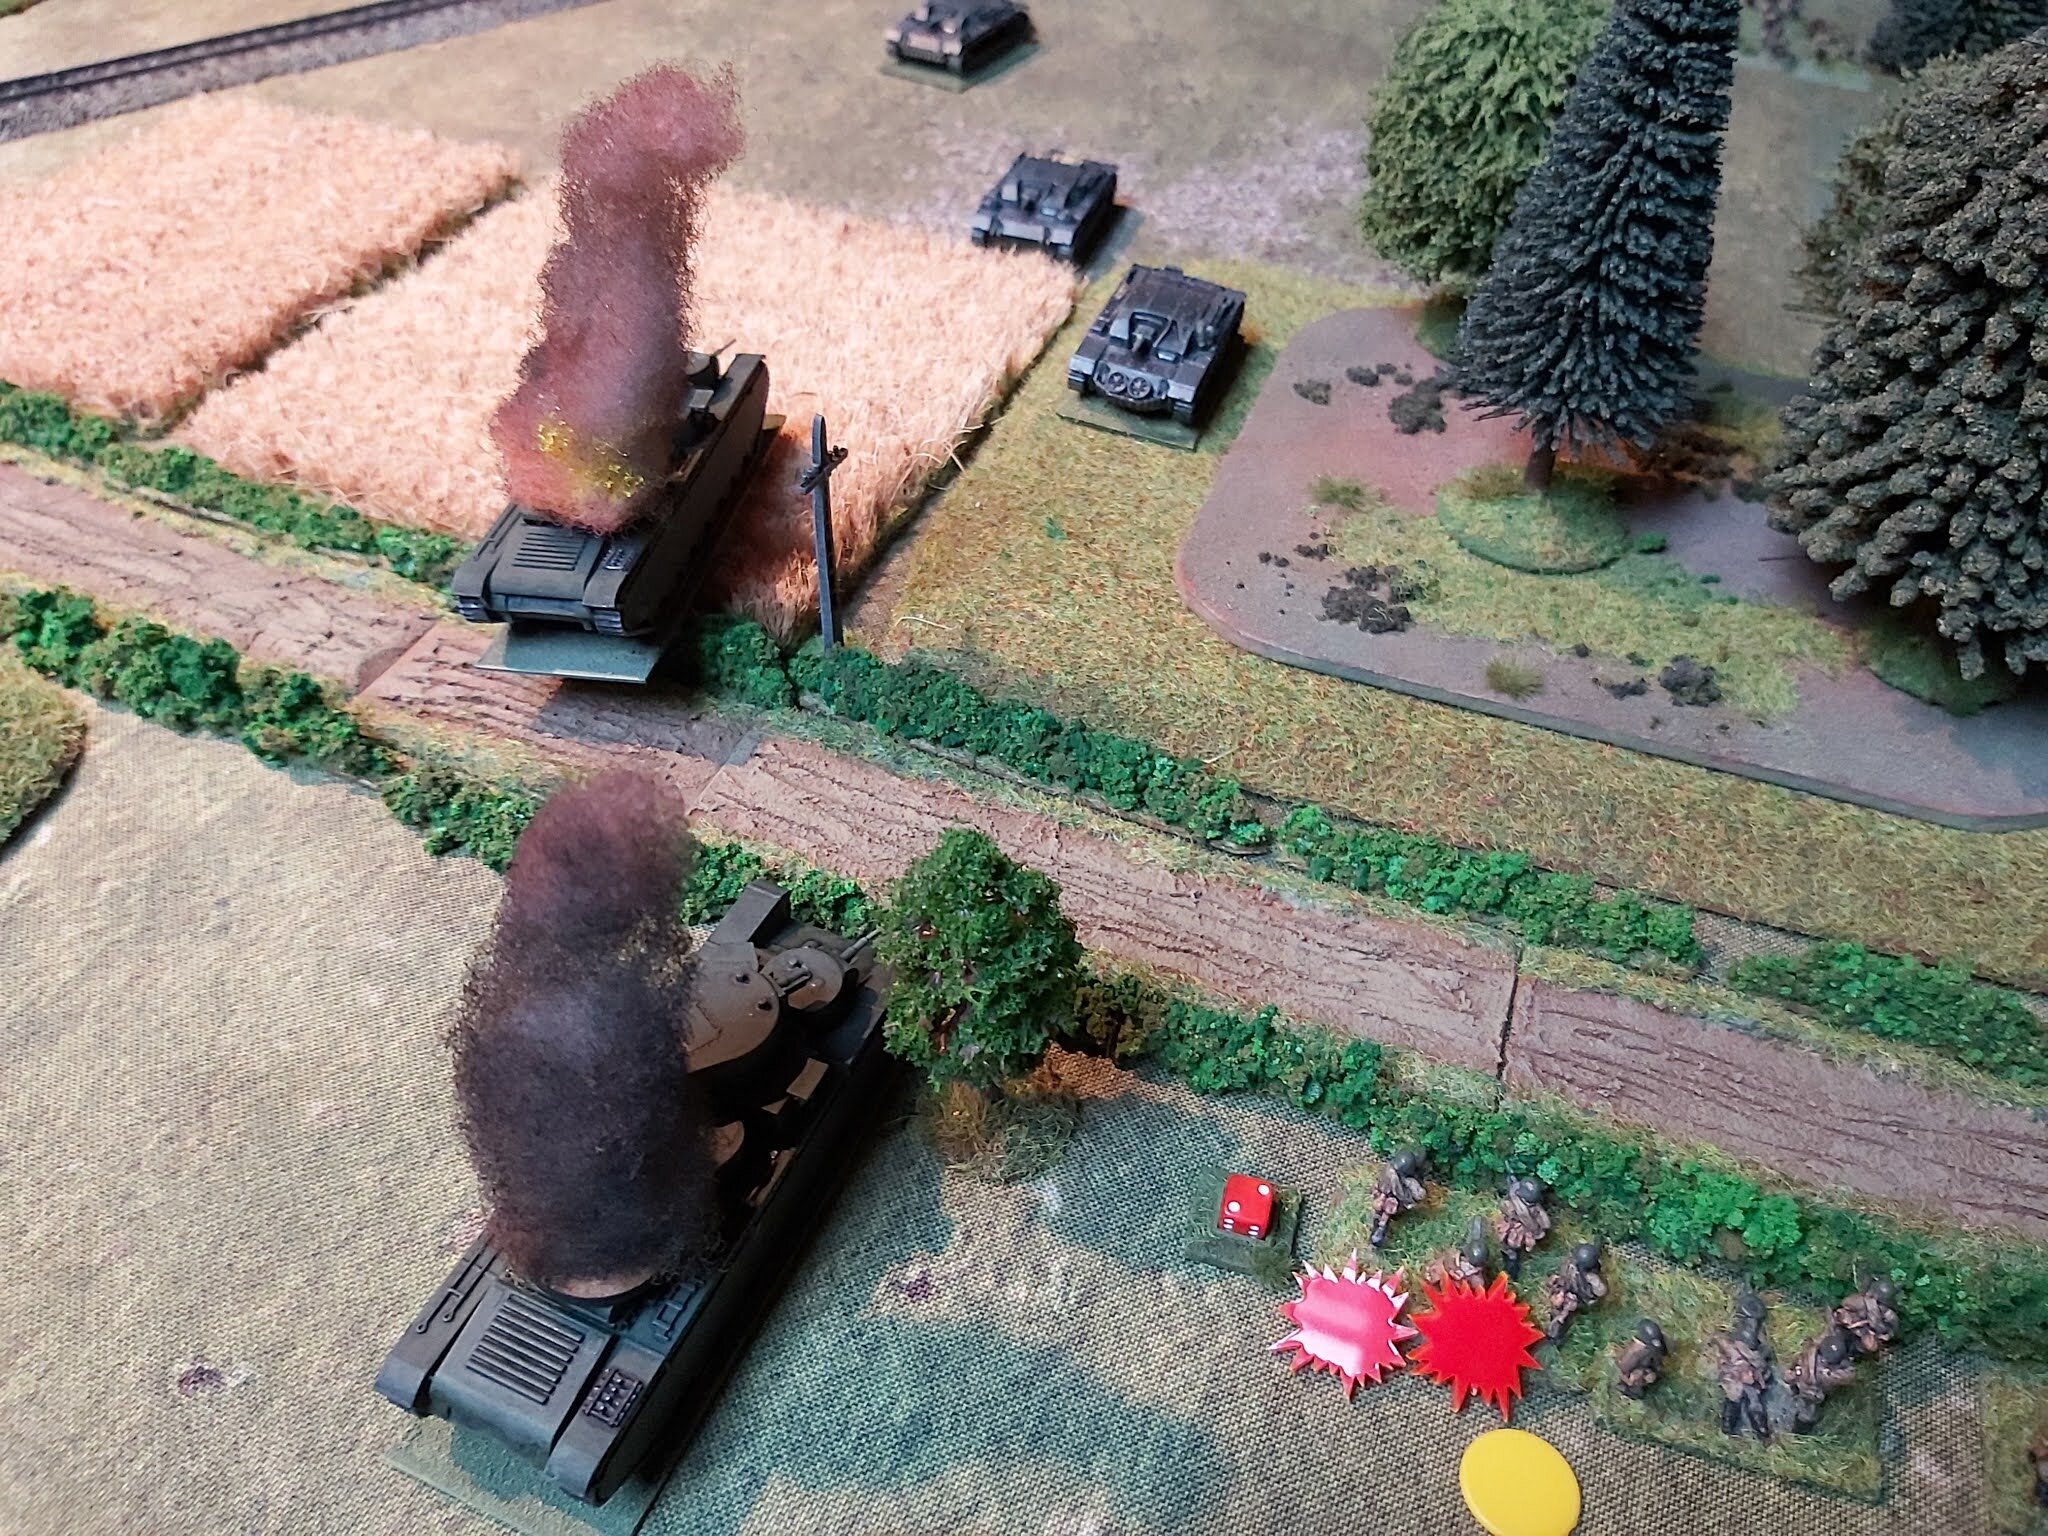 The StuGs were having a field day, brewing up the second T-35 and laying fire down on the Russian section holding the hedge line. 